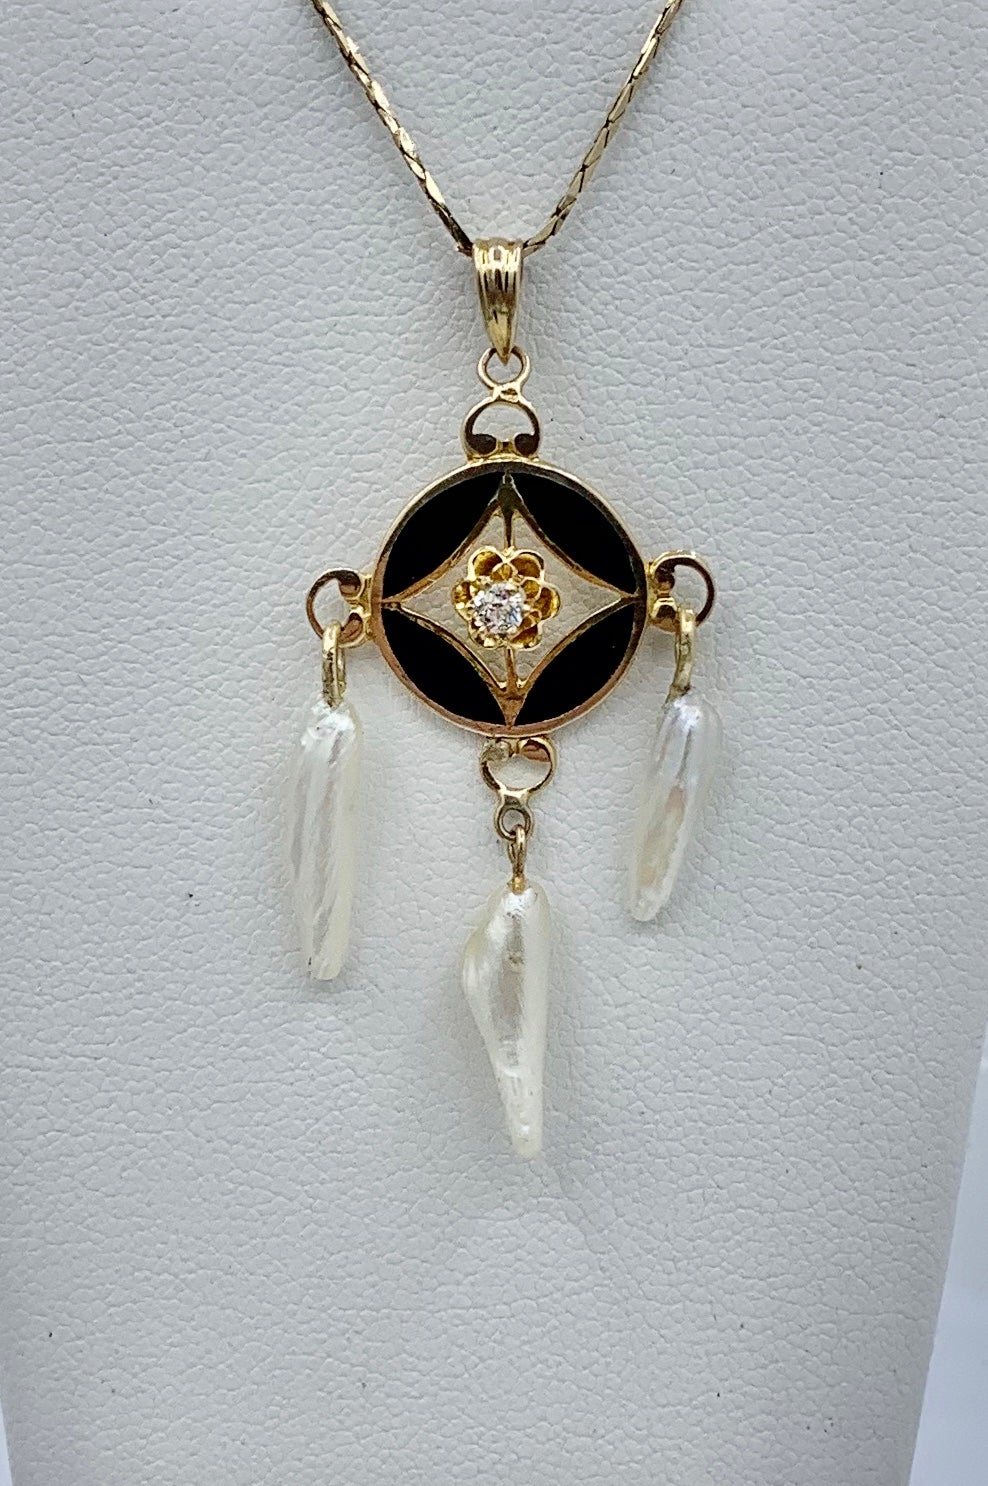 This is a beautiful antique Art Deco early 20th Century Old Mine Cut Diamond, Black Enamel and Pearl Pendant Lavaliere in 14 Karat Gold.  The exquisite pendant has delicate open work design, wonderful Art Deco styling, and beautiful gems.  In the